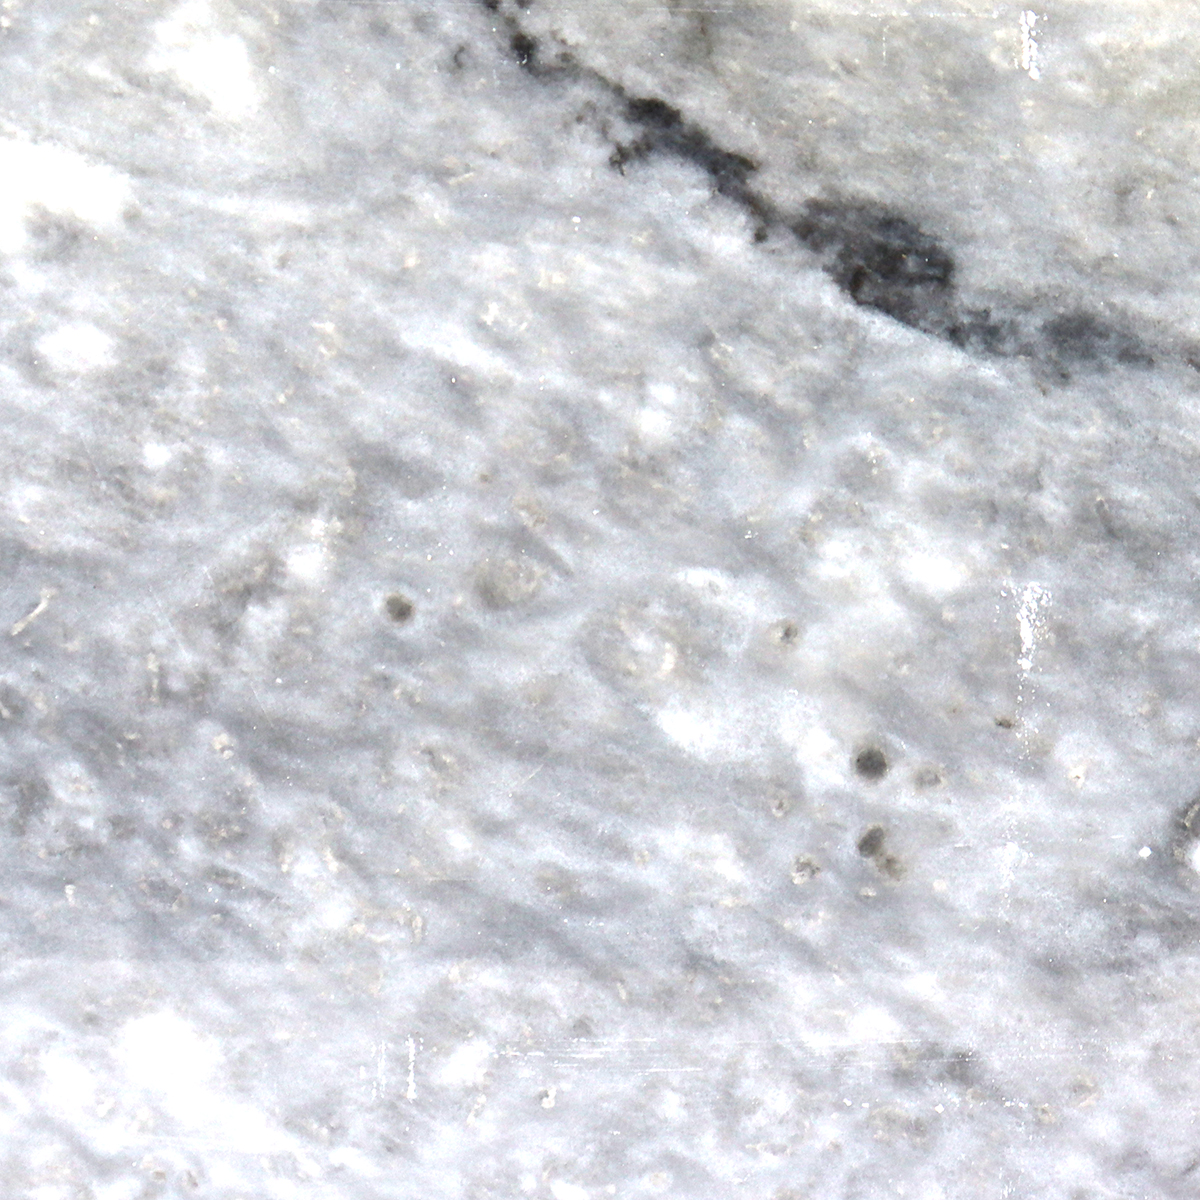 static/products/marbleSlabs/products/MG20.jpg 